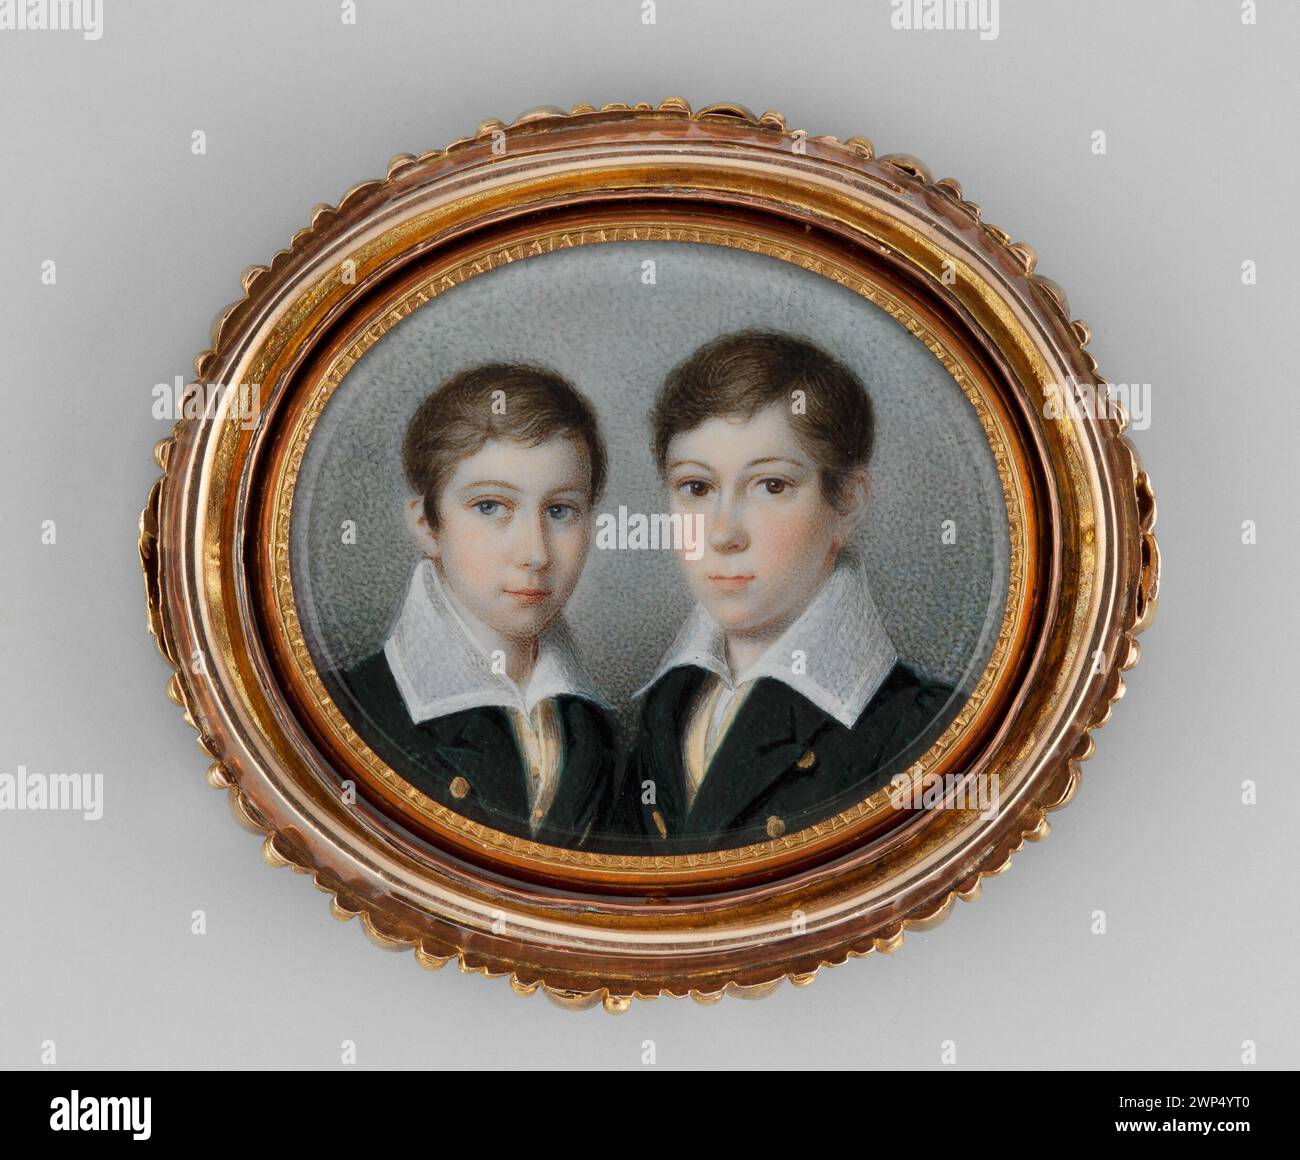 a) Ernest I. Anton Karl Ludwig von Sachsen-Coburg-Goth (1784-1844) b) Ernest II (1818-1893) with his brother Albert;  1830 (1830-00-00-1830-00-00);Hesja (Germany), Hessen und Bei Rhein, Ernst Ludwig (Grossherzog - 1868-1937) - collections, boys, foreign miniatures, men, portraits, men's portraits, siblings, family, rulers Stock Photo